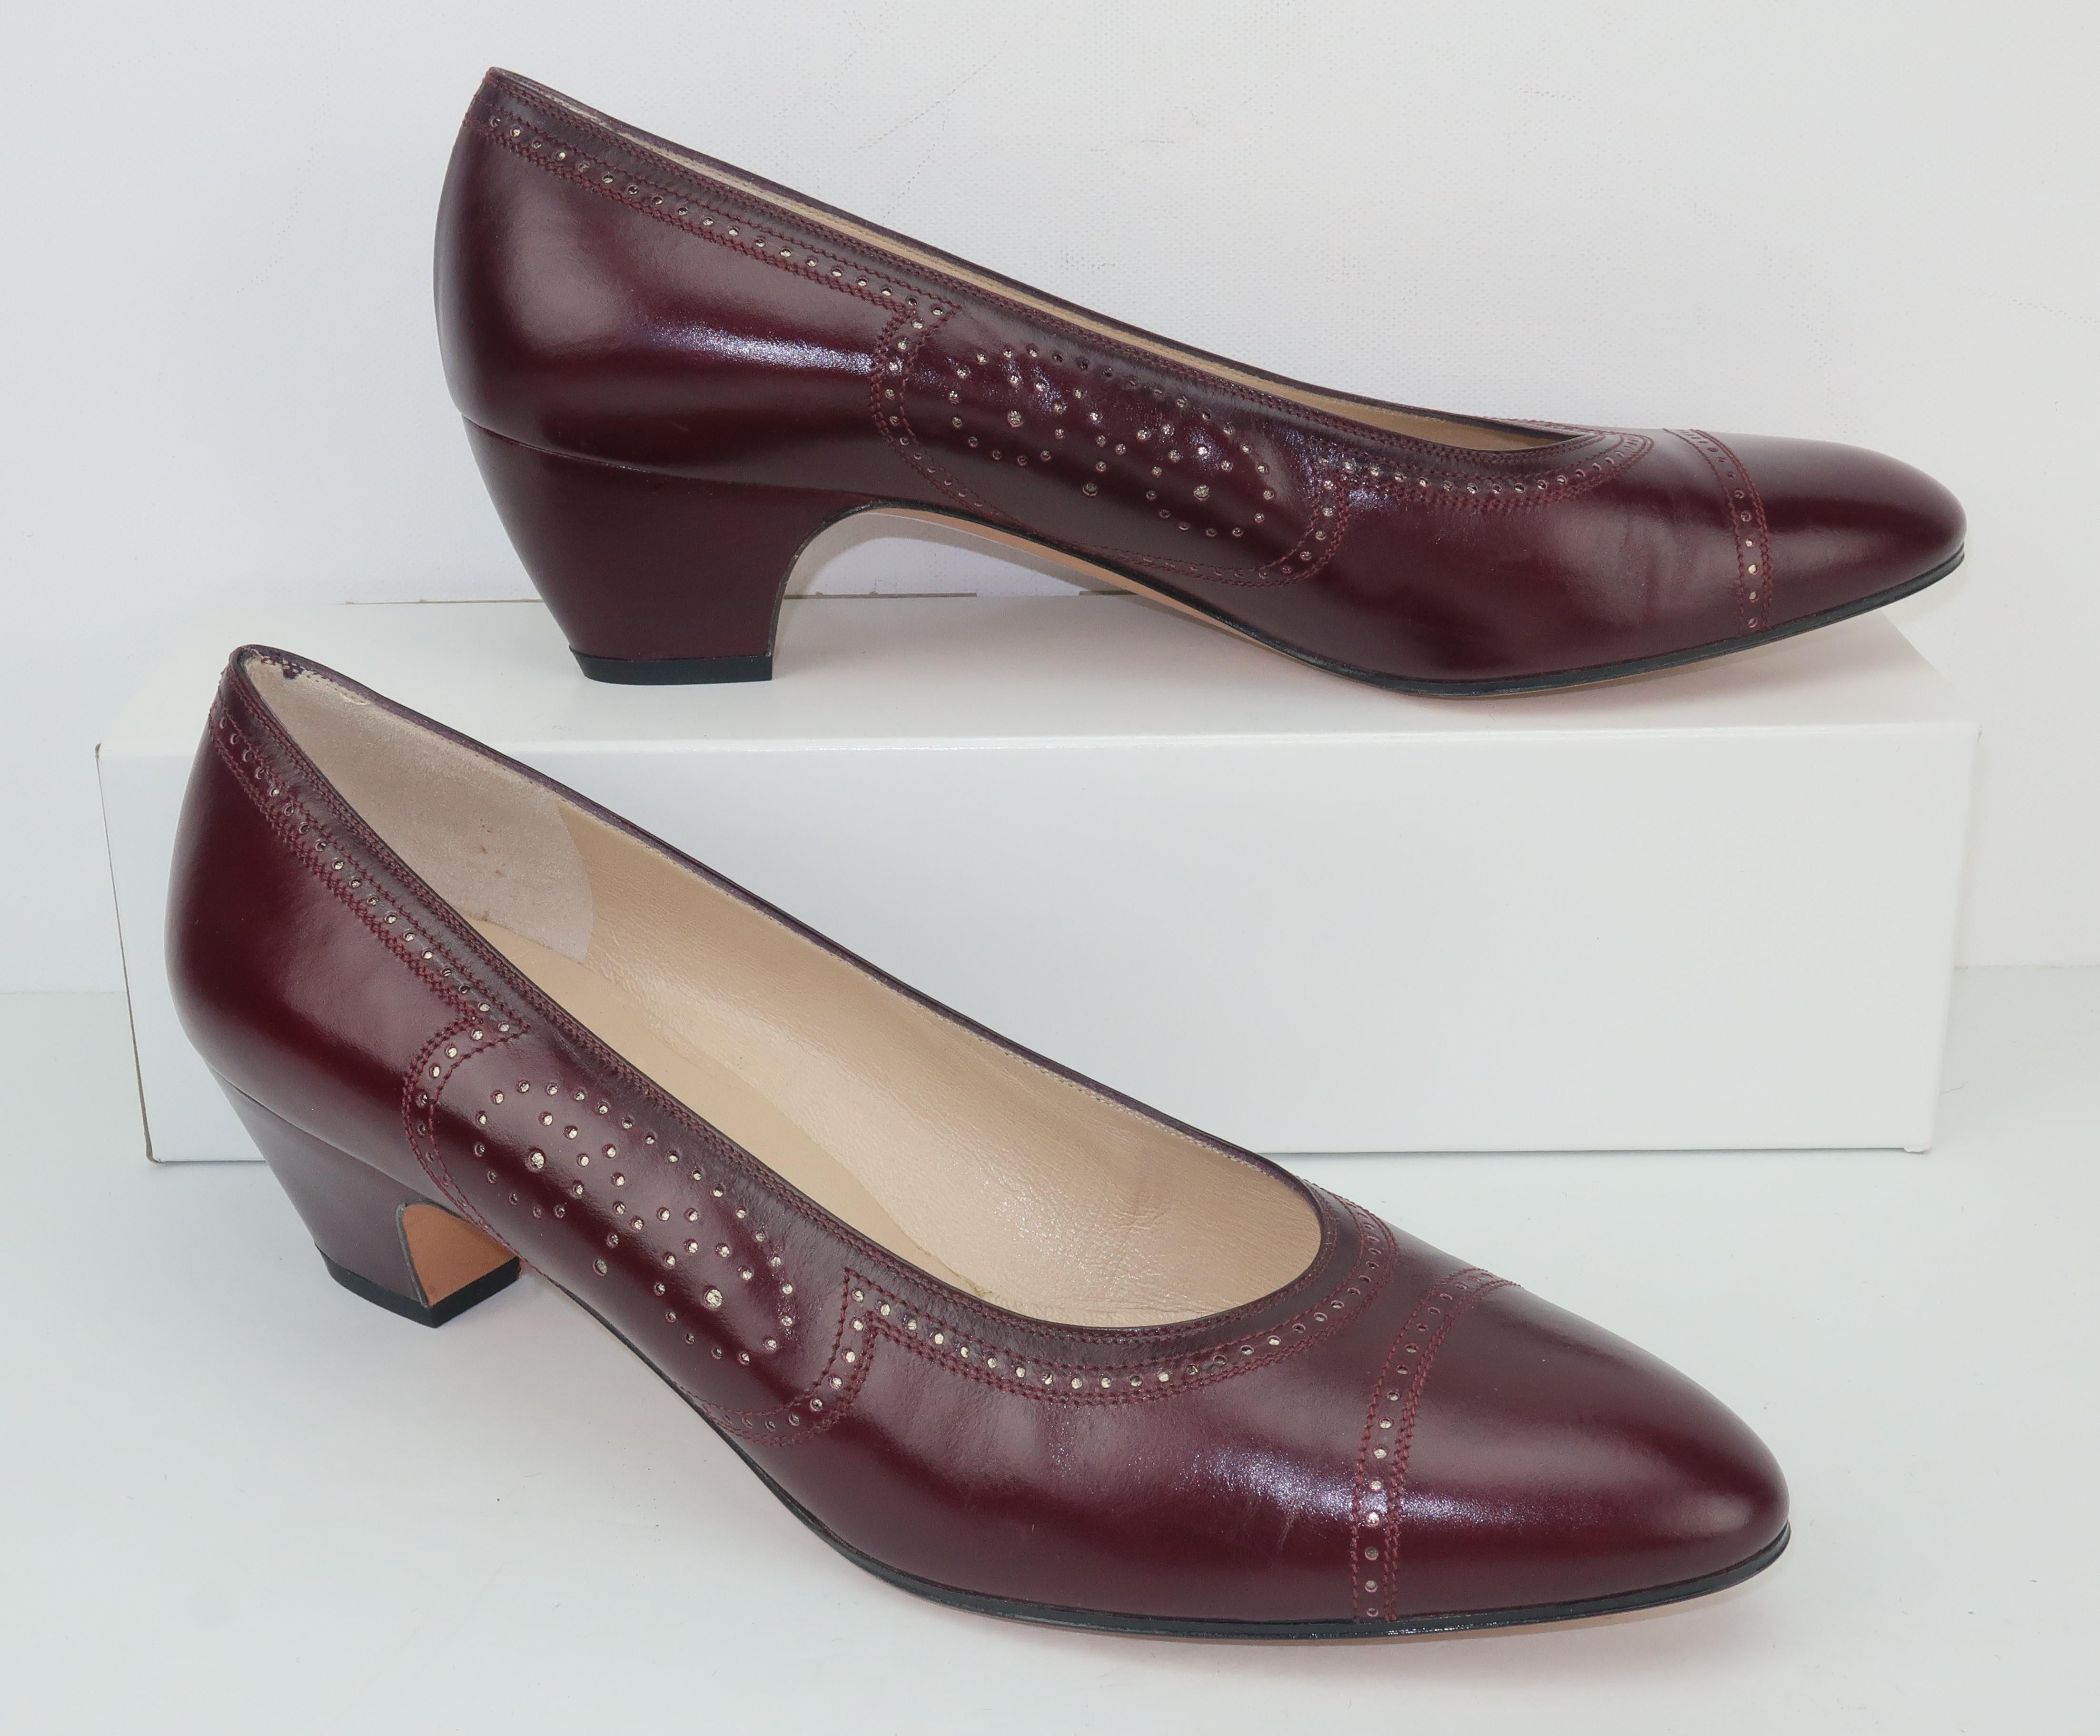 Classic Ferragamo sensibility with stylish details makes these burgundy leather shoes a functional option for casual wear or more professional attire.  The spectator style decoration adds a unique perforated design accented with a subtle gold